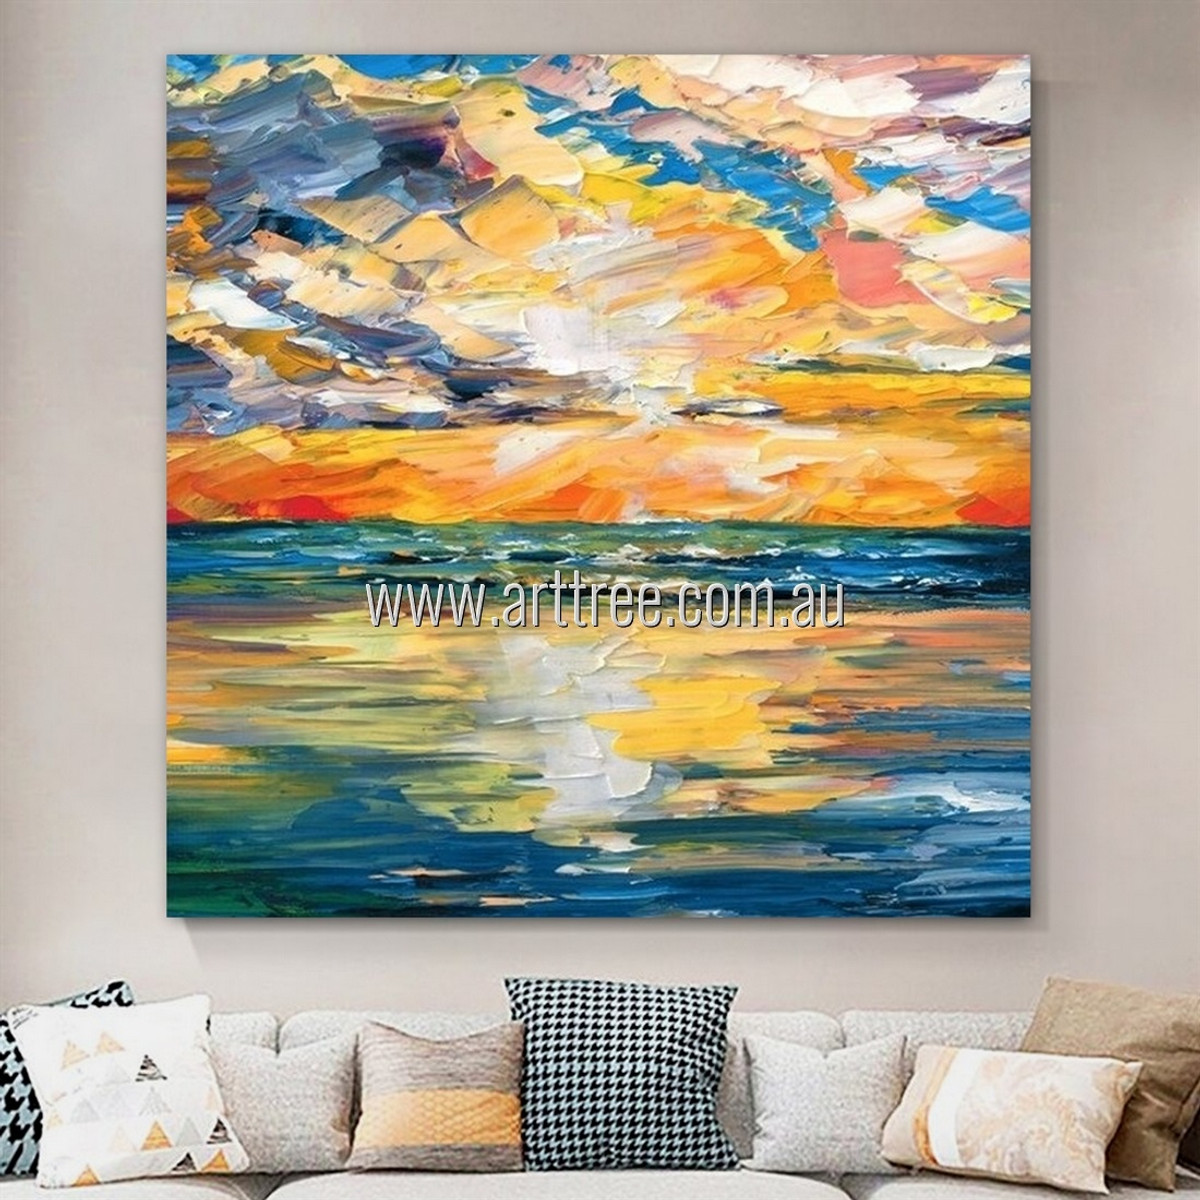 Colorful Welkin Abstract Seascape Heavy Texture Artist Handmade Modern Stretched Acrylic Painting For Room Decoration